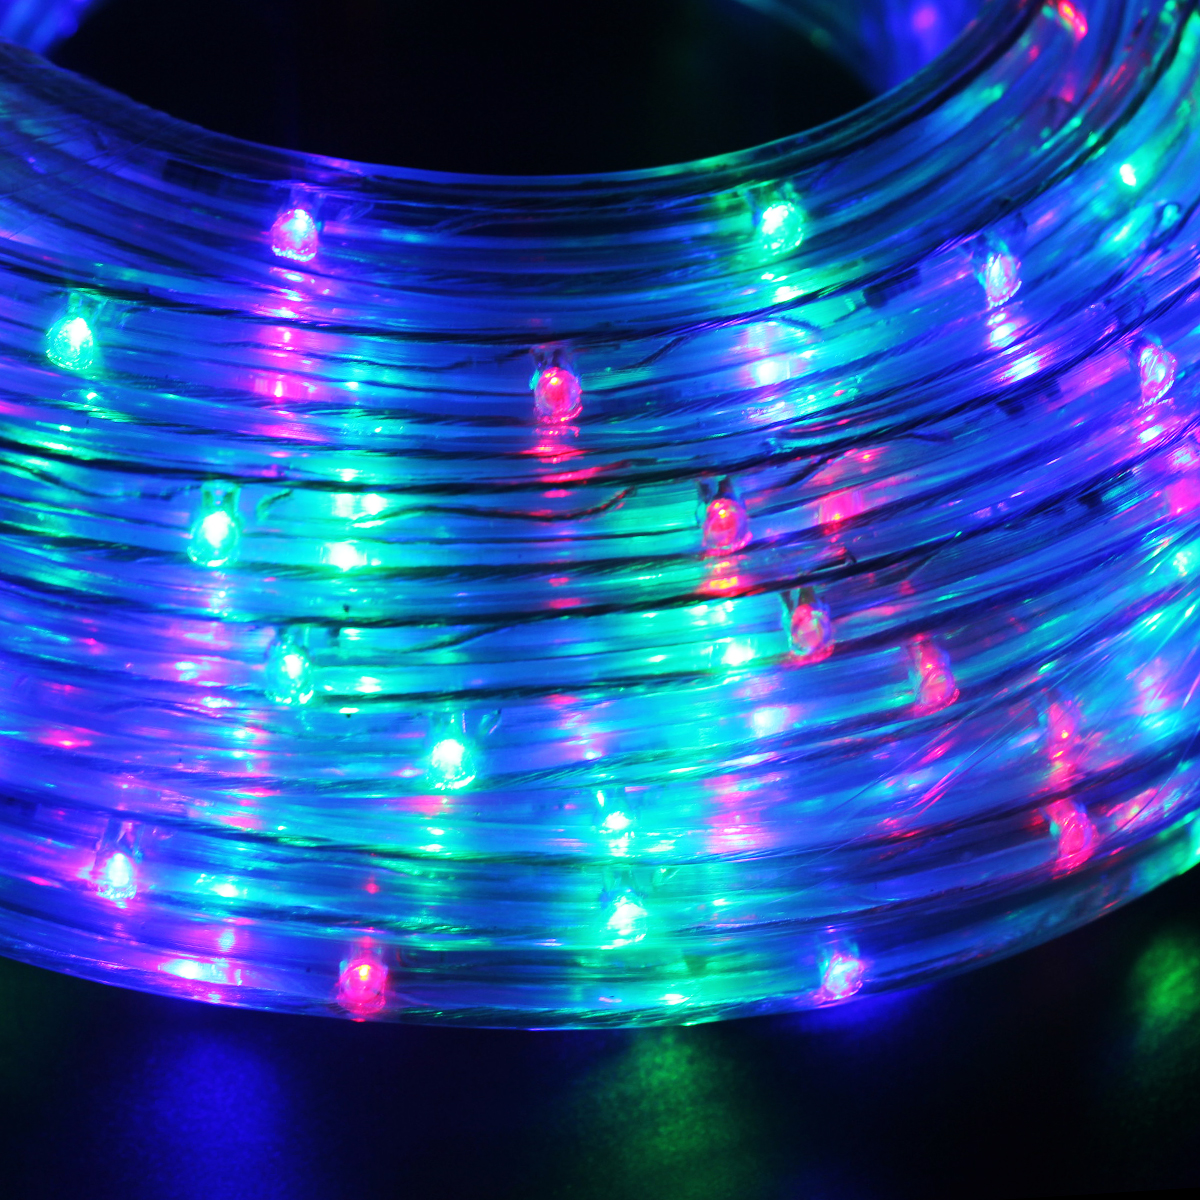 30 Ft LED Rope Fairy Light with Remote for Indoor/Outdoor Halloween Christmas Wedding Garden Patio Pool Decor 4 Modes Multi-Color - image 4 of 7